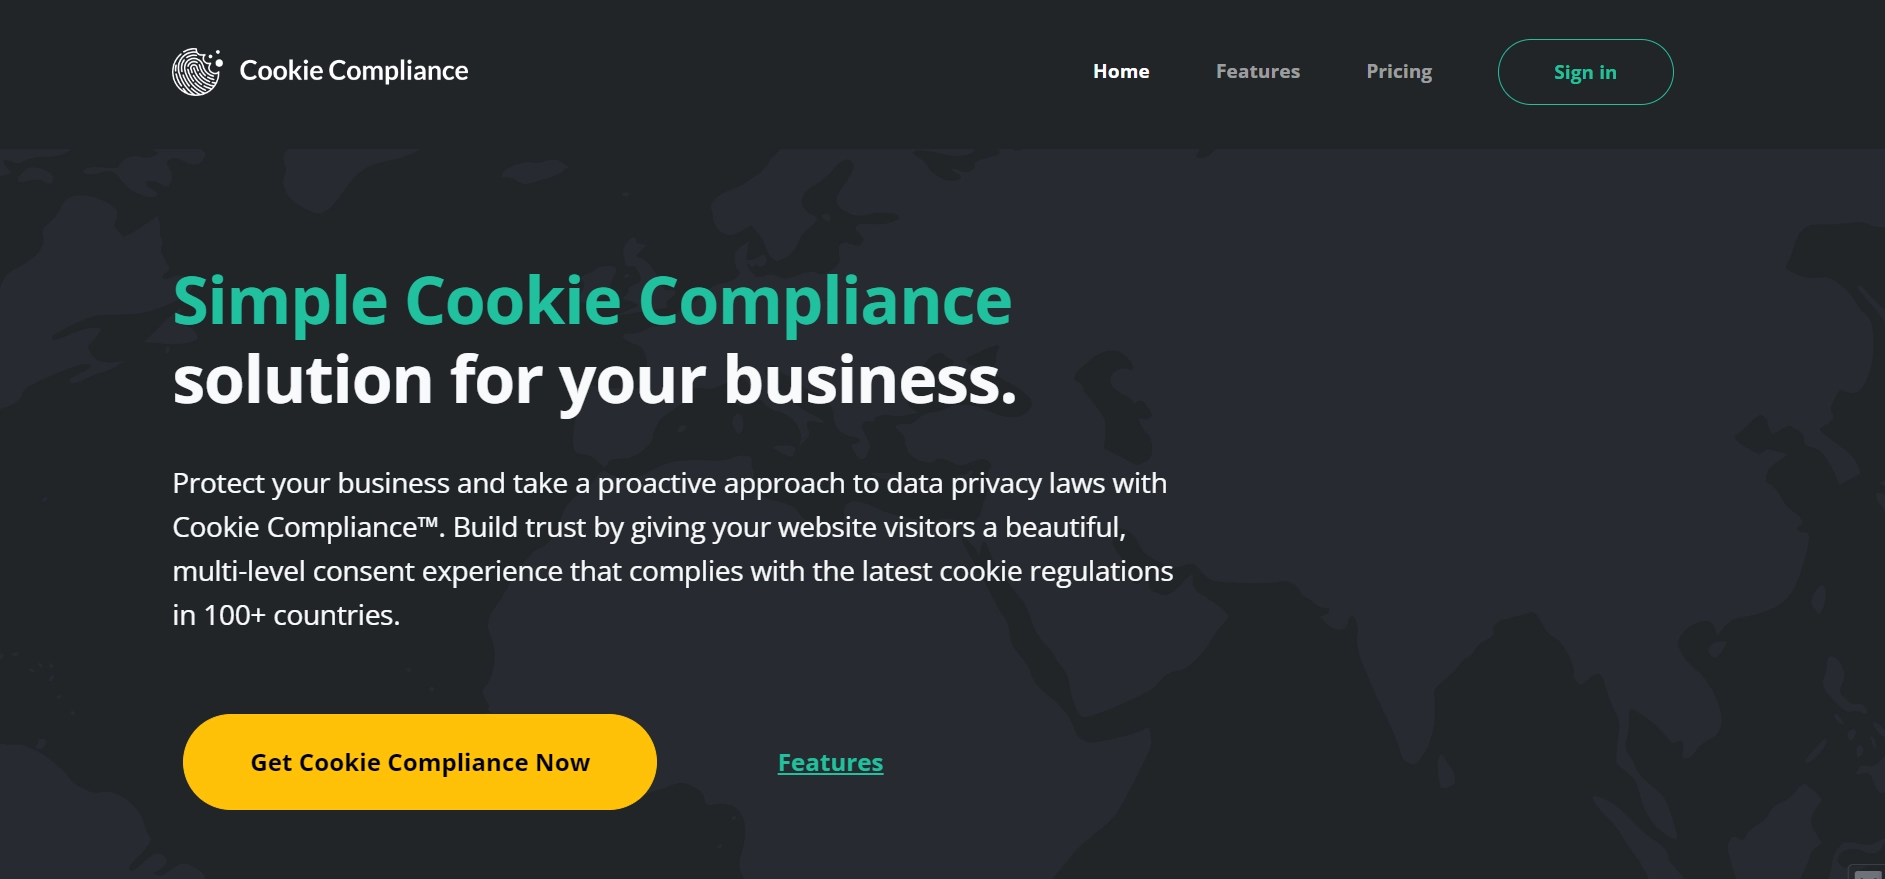 Cookie Notice and Compliance for GDPR/CCPA